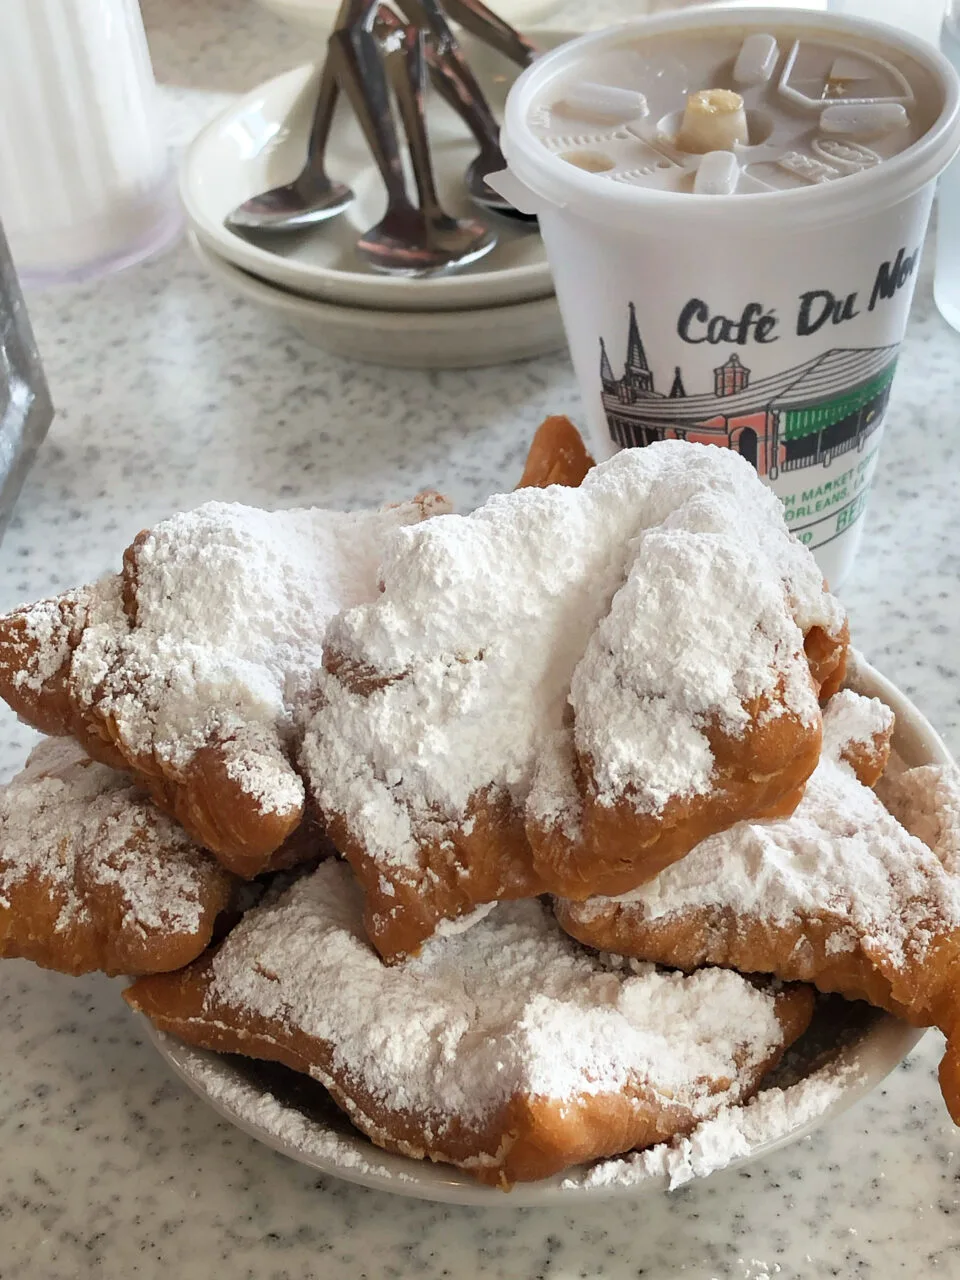 Beignets from Cafe du monde, a great Cajun and creole food to try in New Orleans.